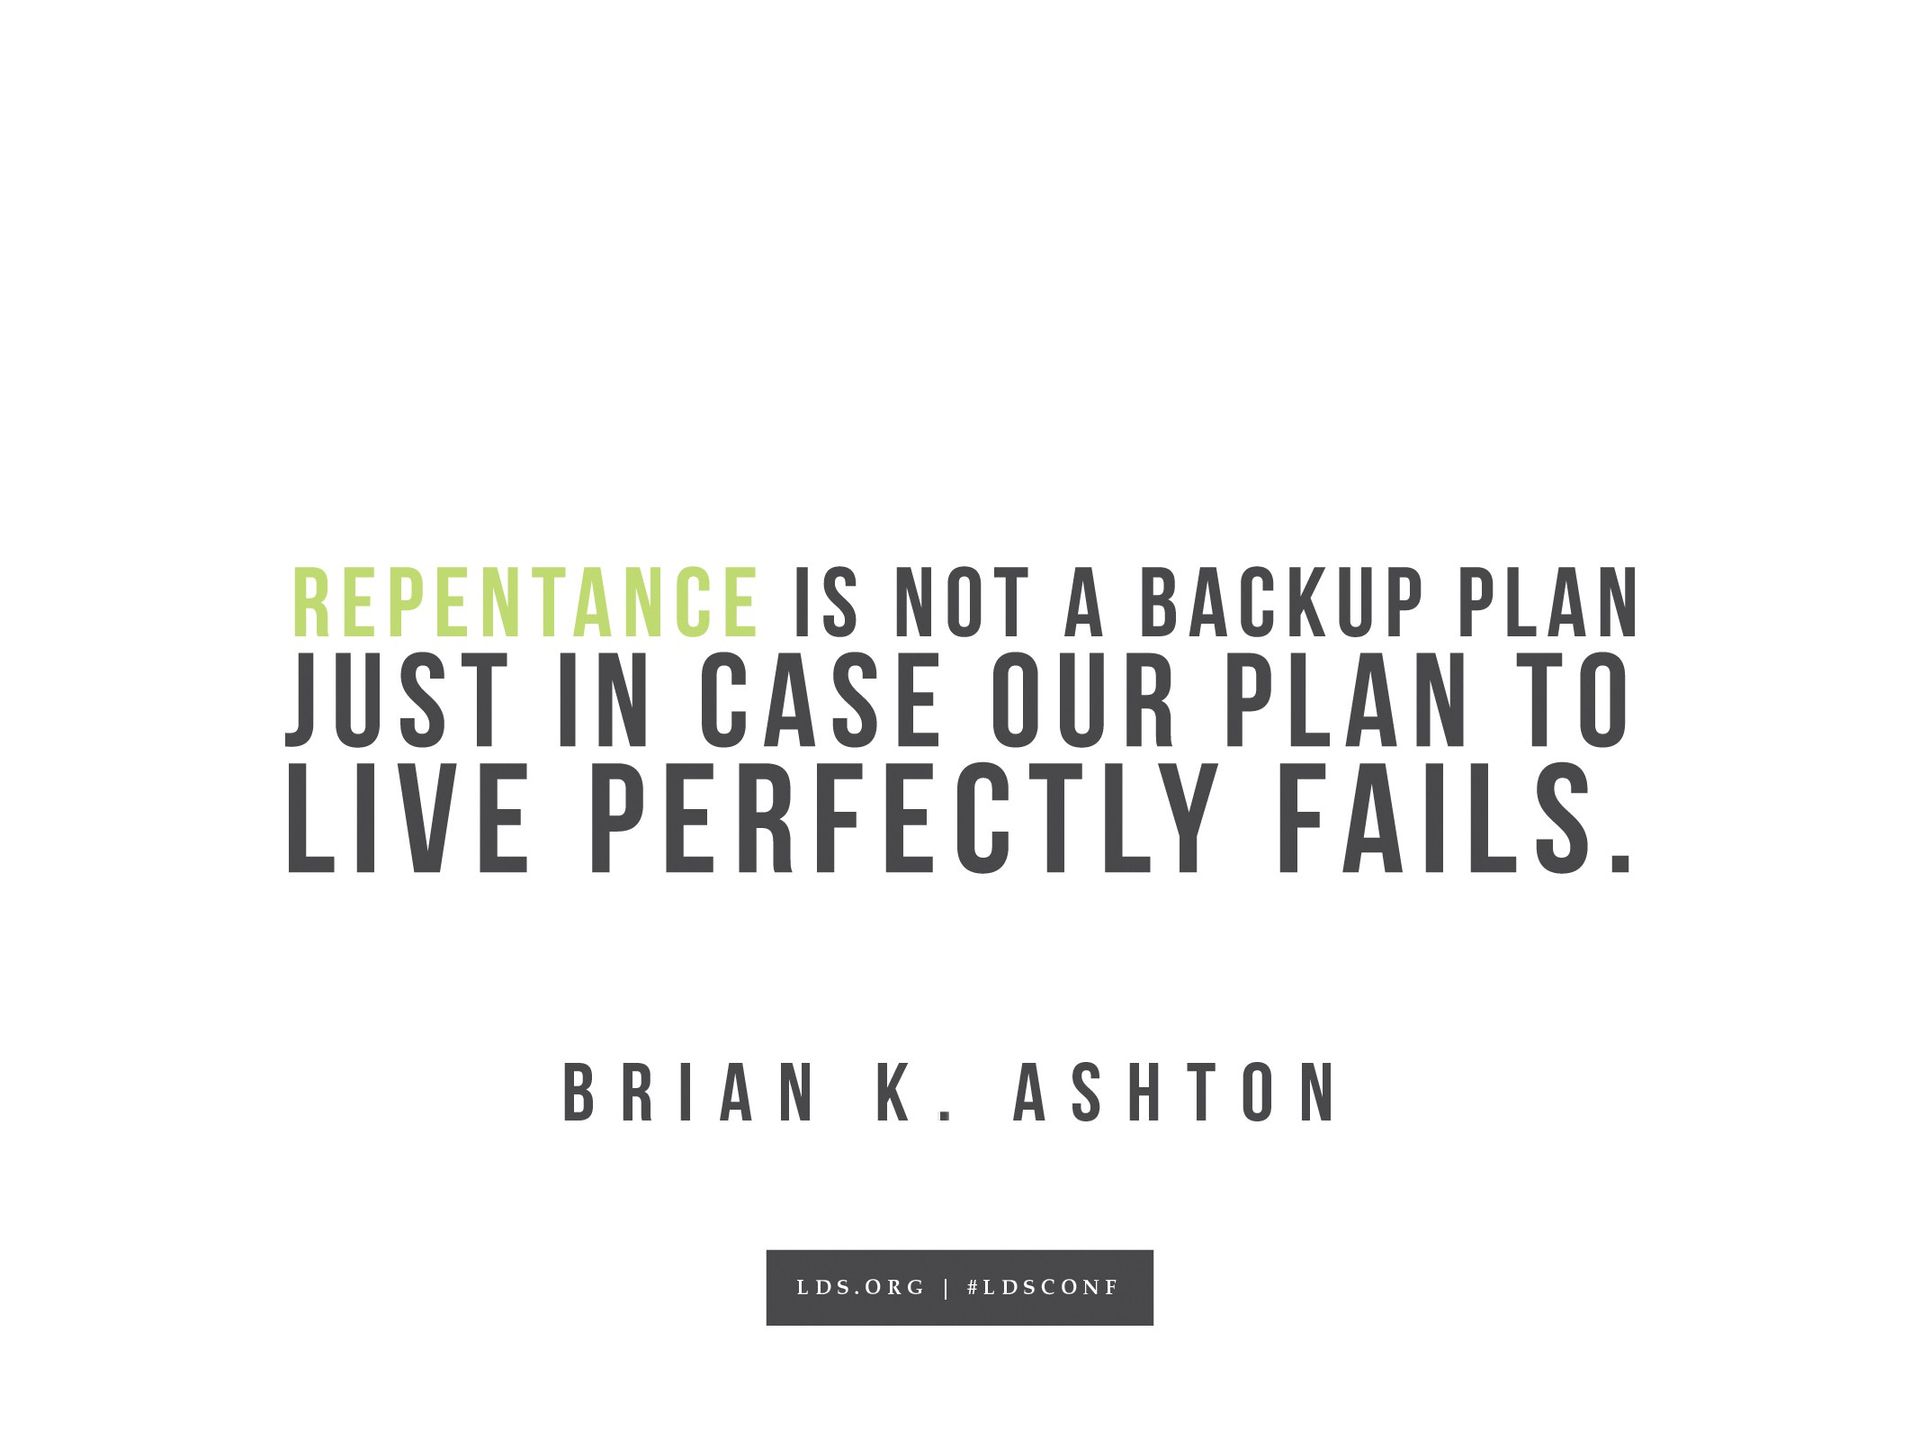 “Repentance is not a backup plan just in case our plan to live perfectly fails.”—Brian K. Ashton, “The Doctrine of Christ”